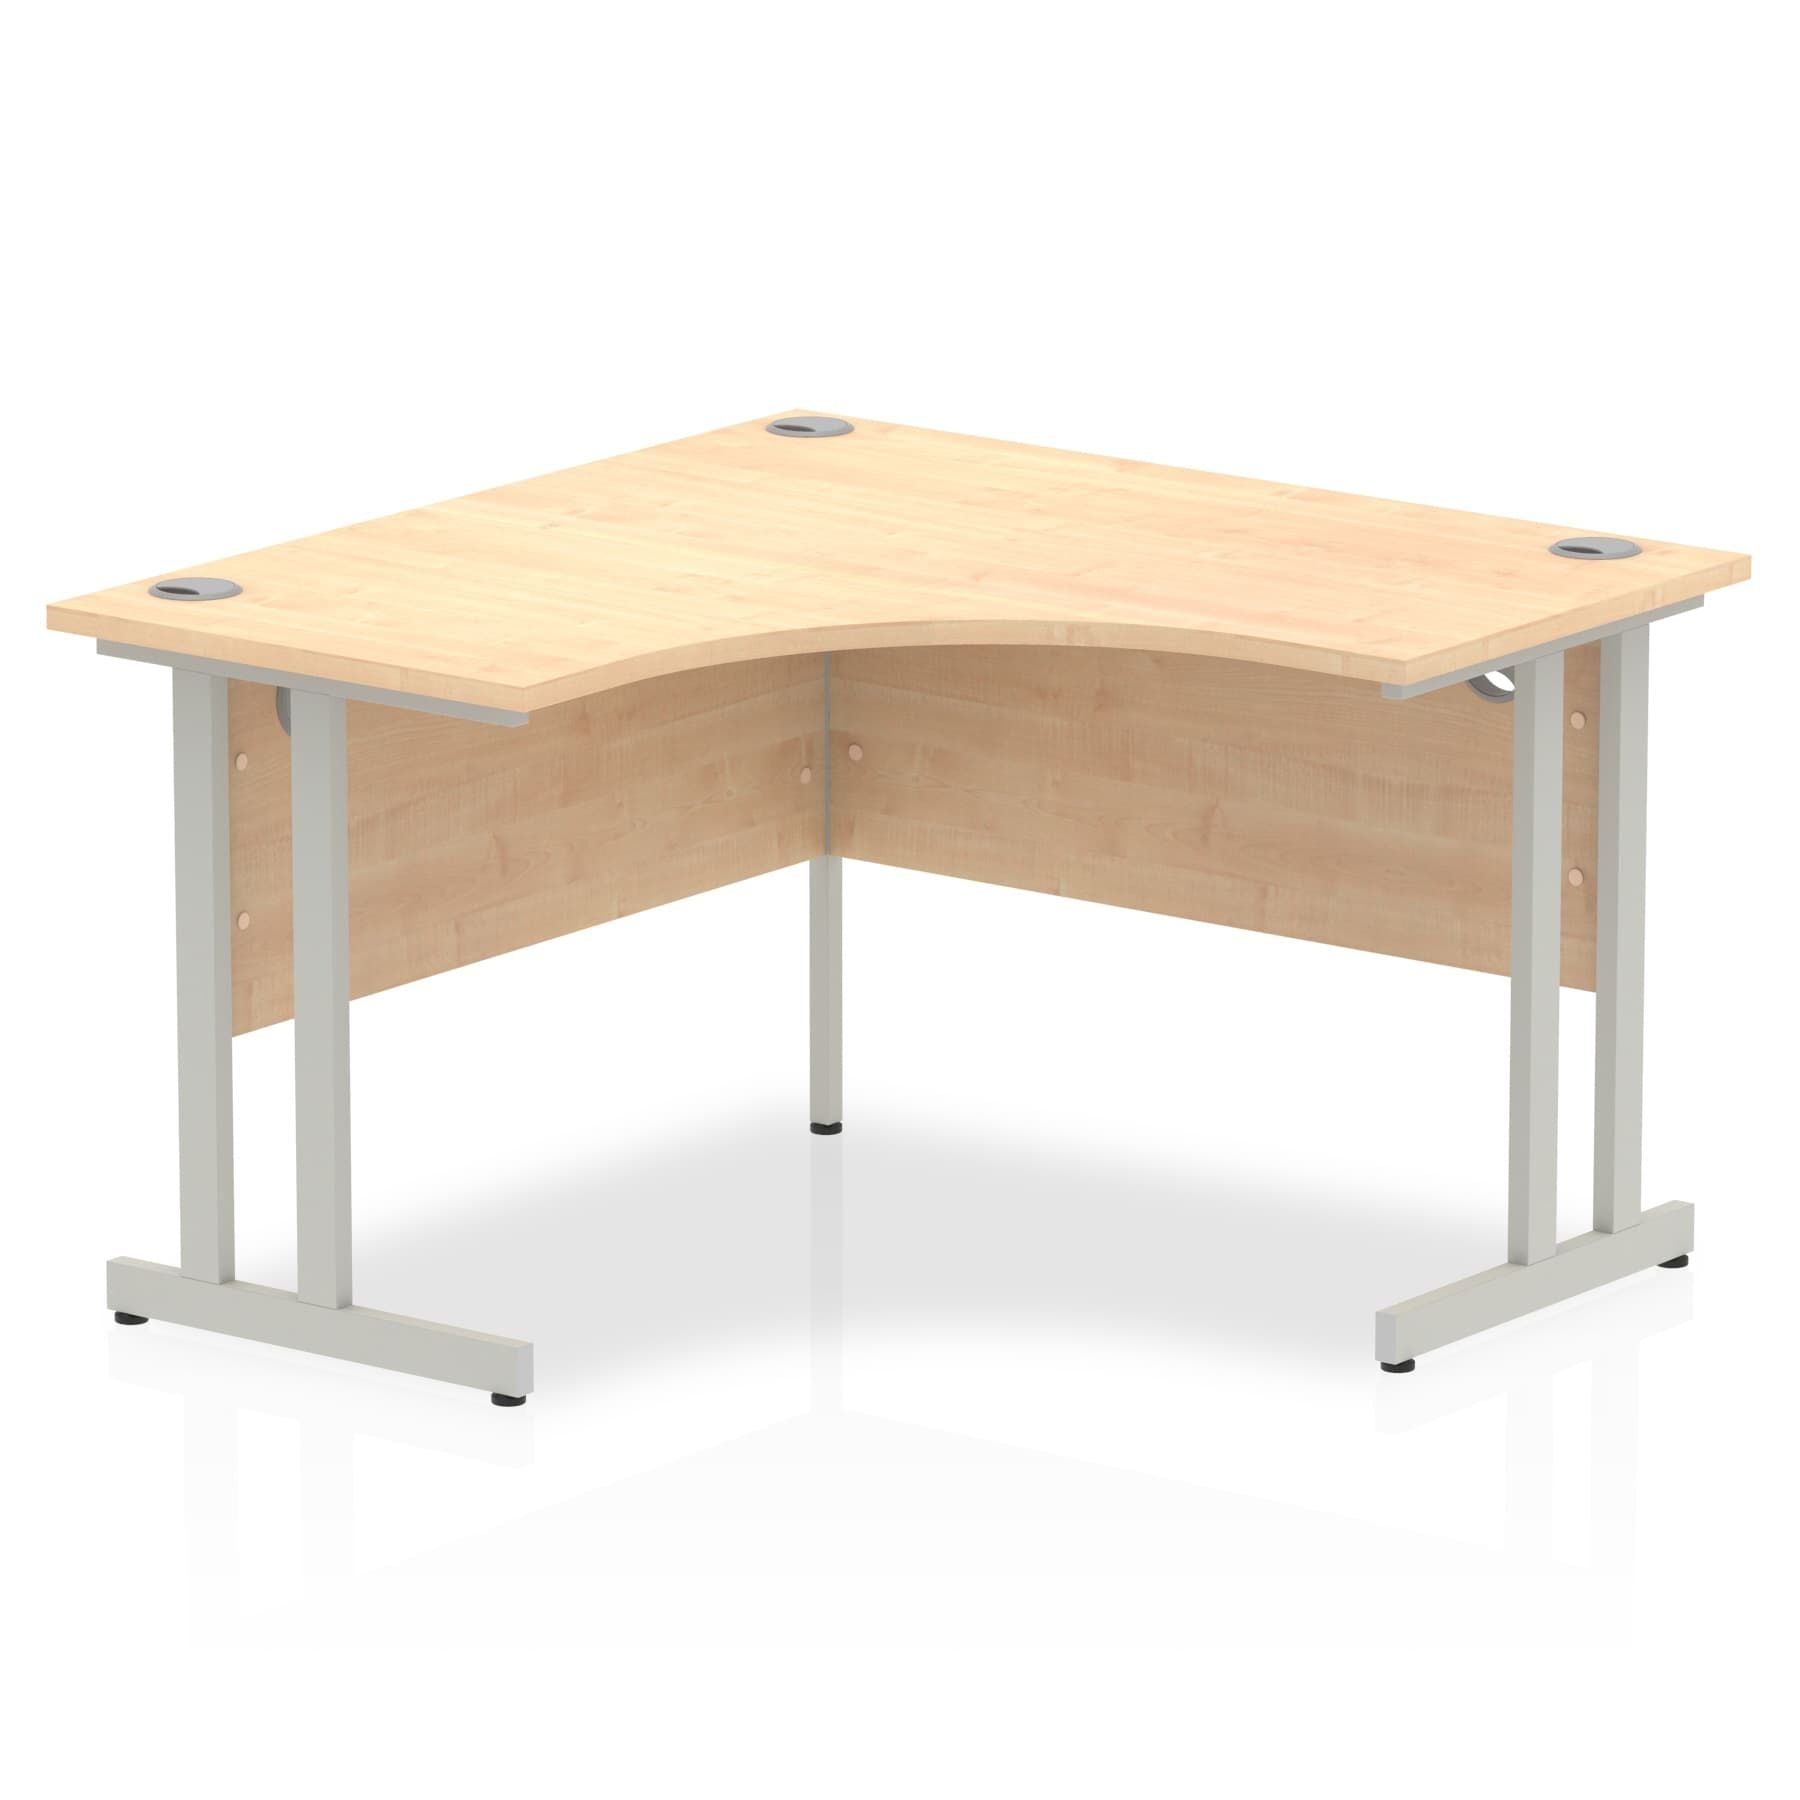 Impulse 1200mm Cantilever Leg Corner Desk - MFC Material, Self-Assembly, 5-Year Guarantee, Silver/White/Black Frame, 1200x1200 Top Size